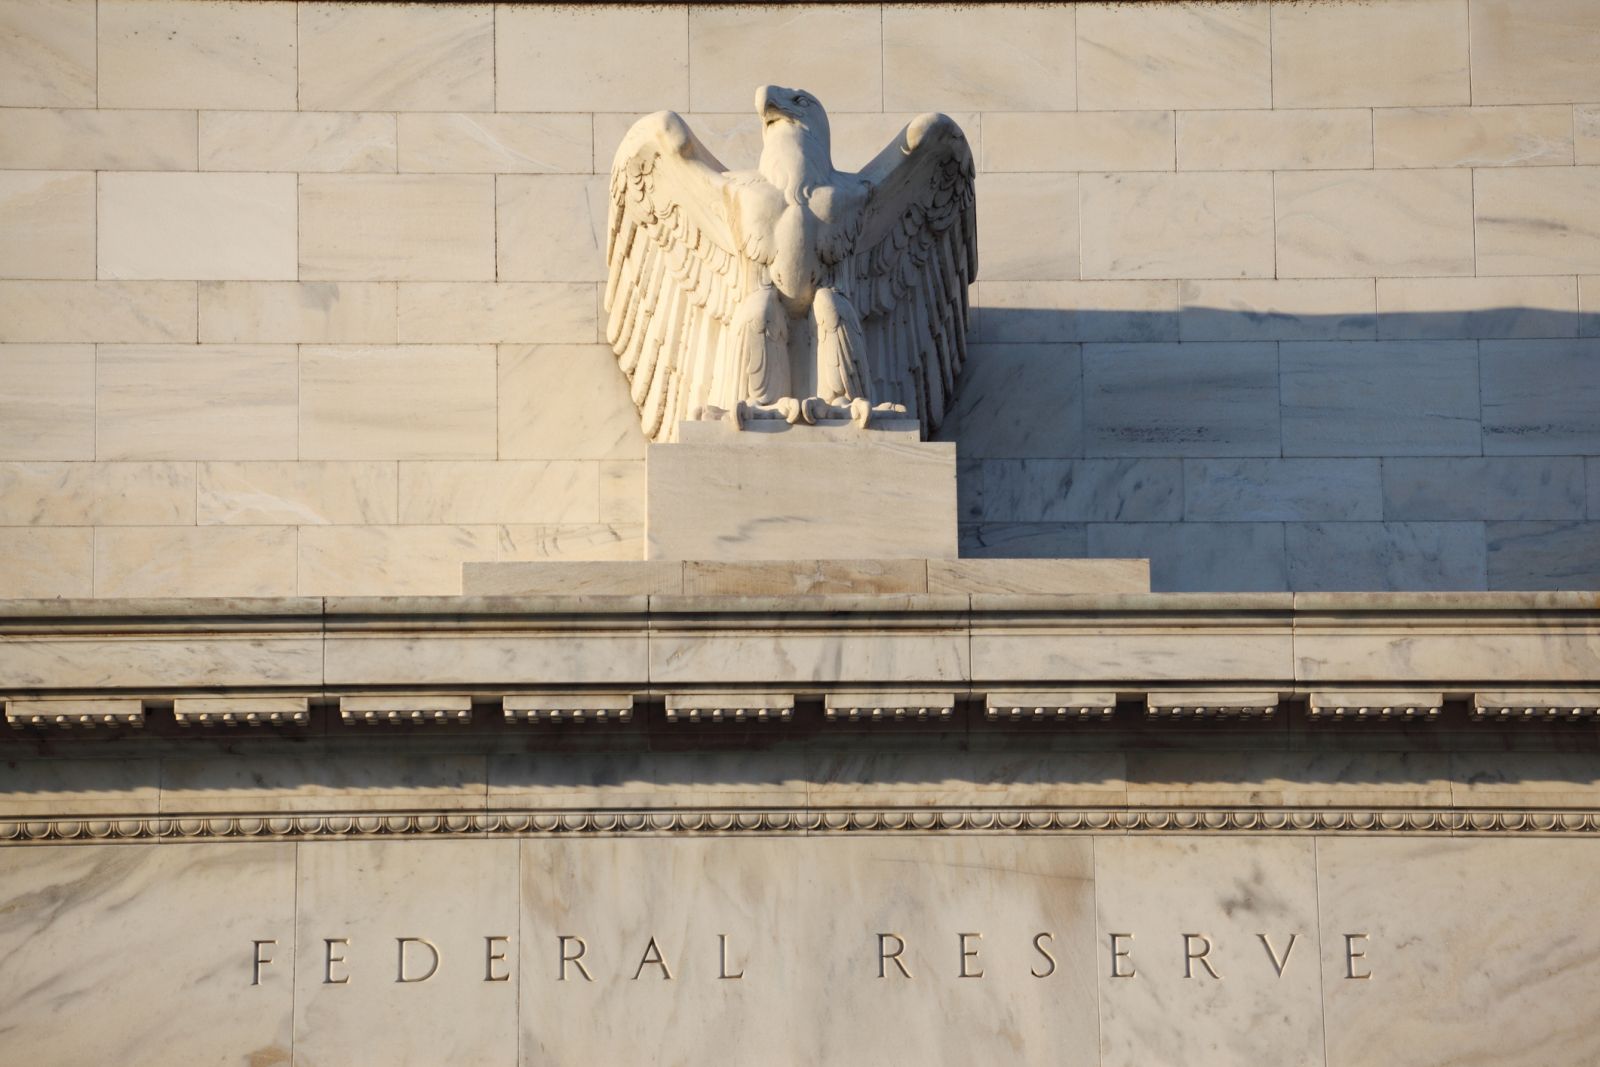 Government - Federal Reserve Building 2 by Jeremy Edwards via iStock